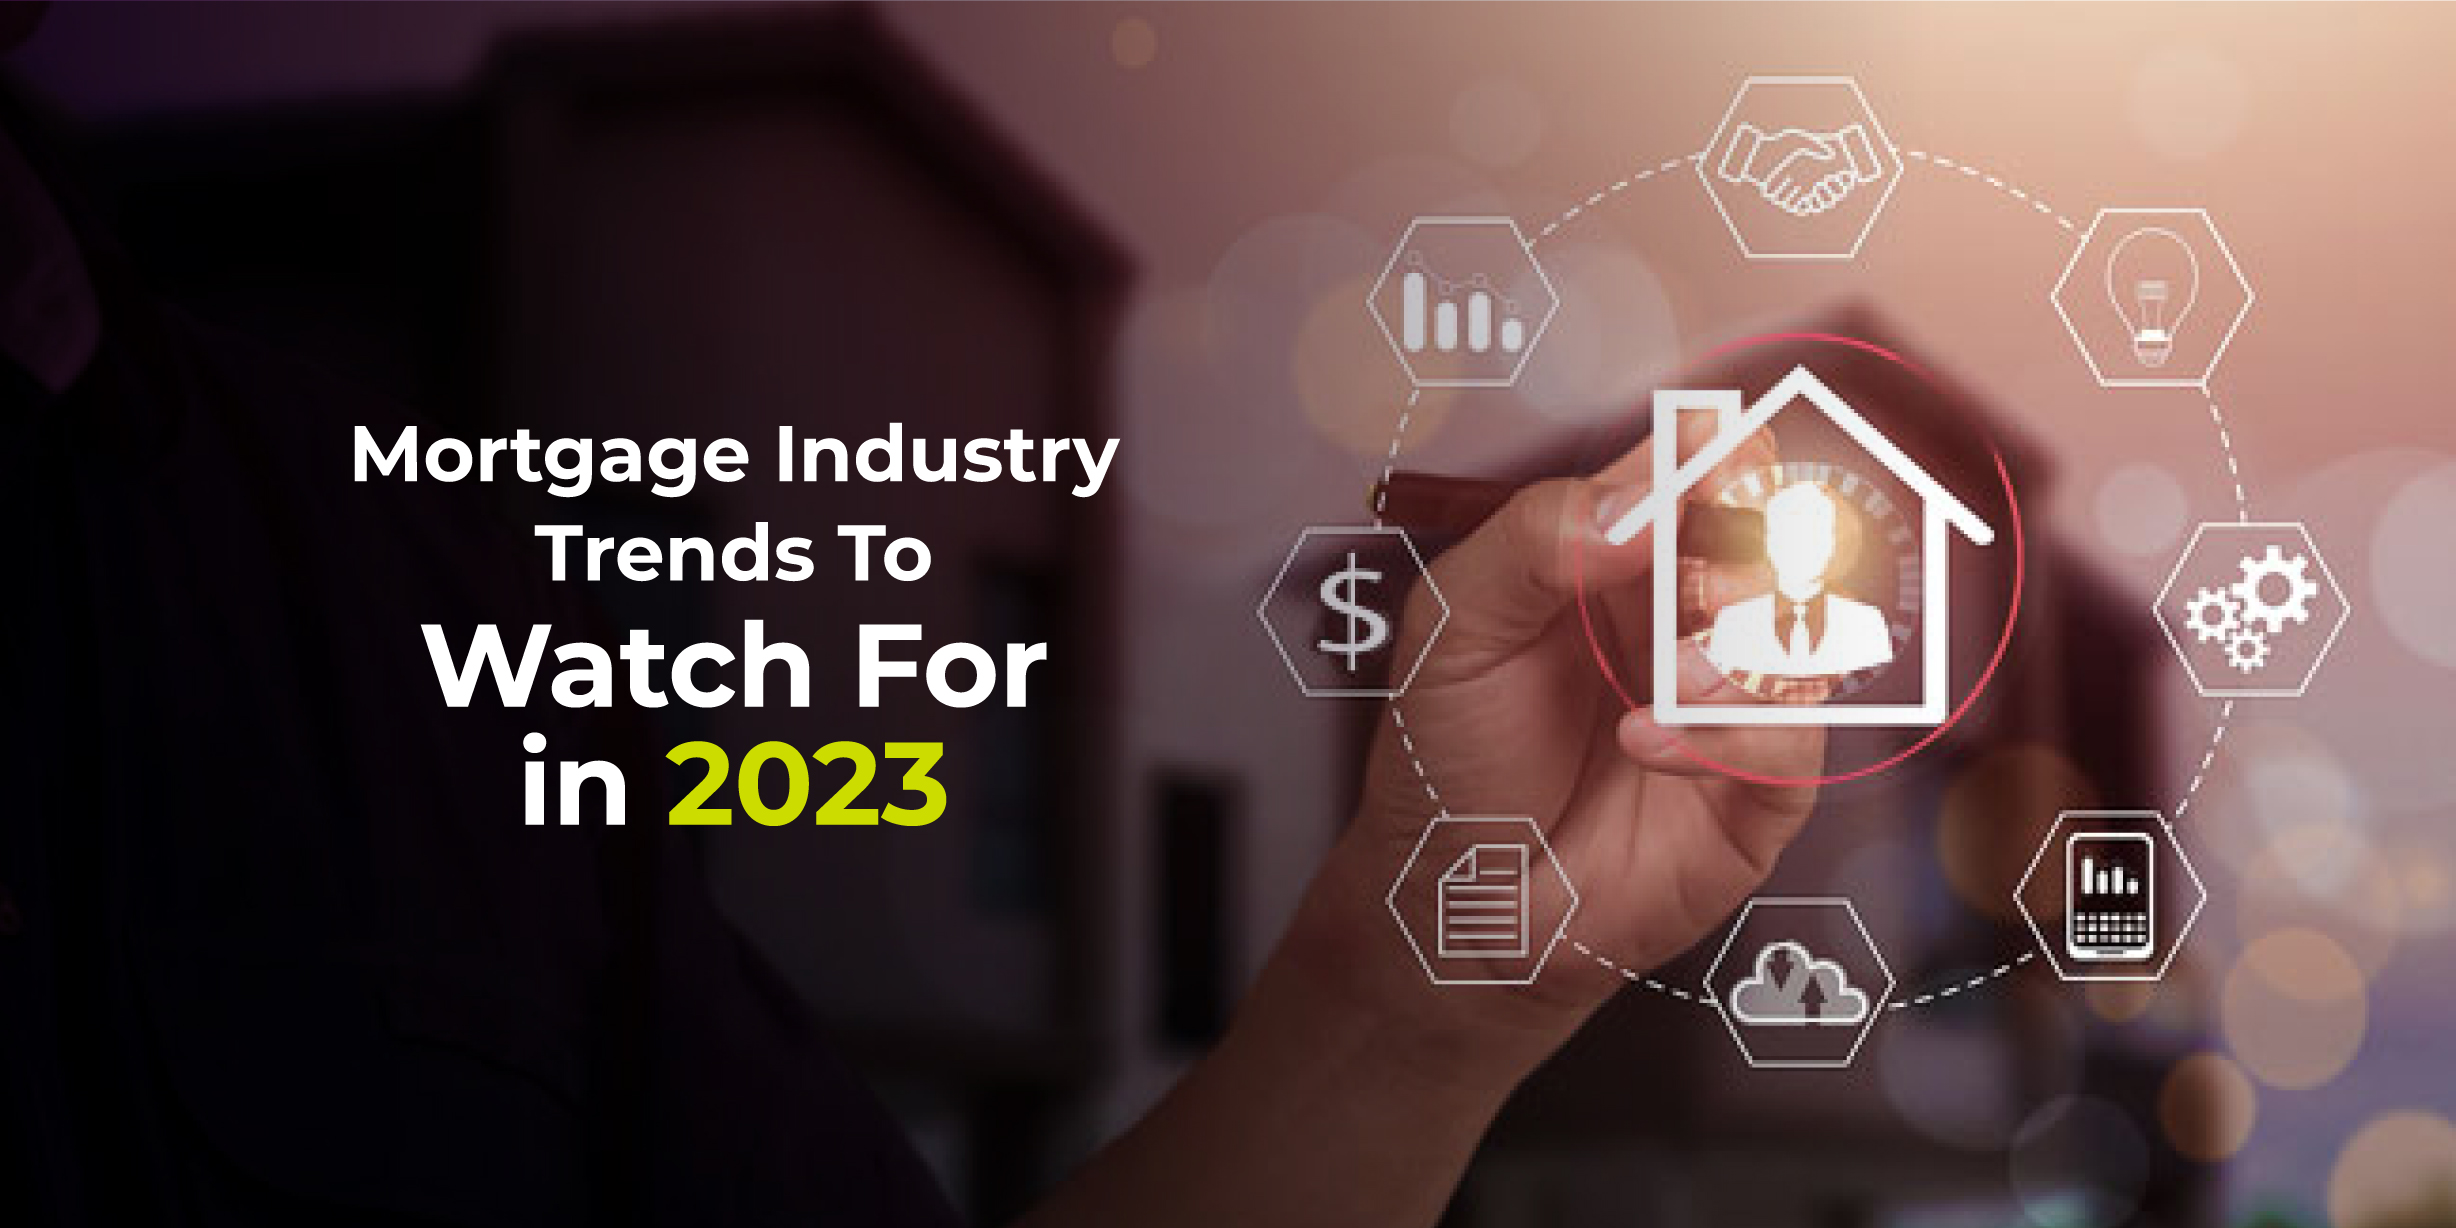 Mortgage Industry Trends to Watch for in 2023